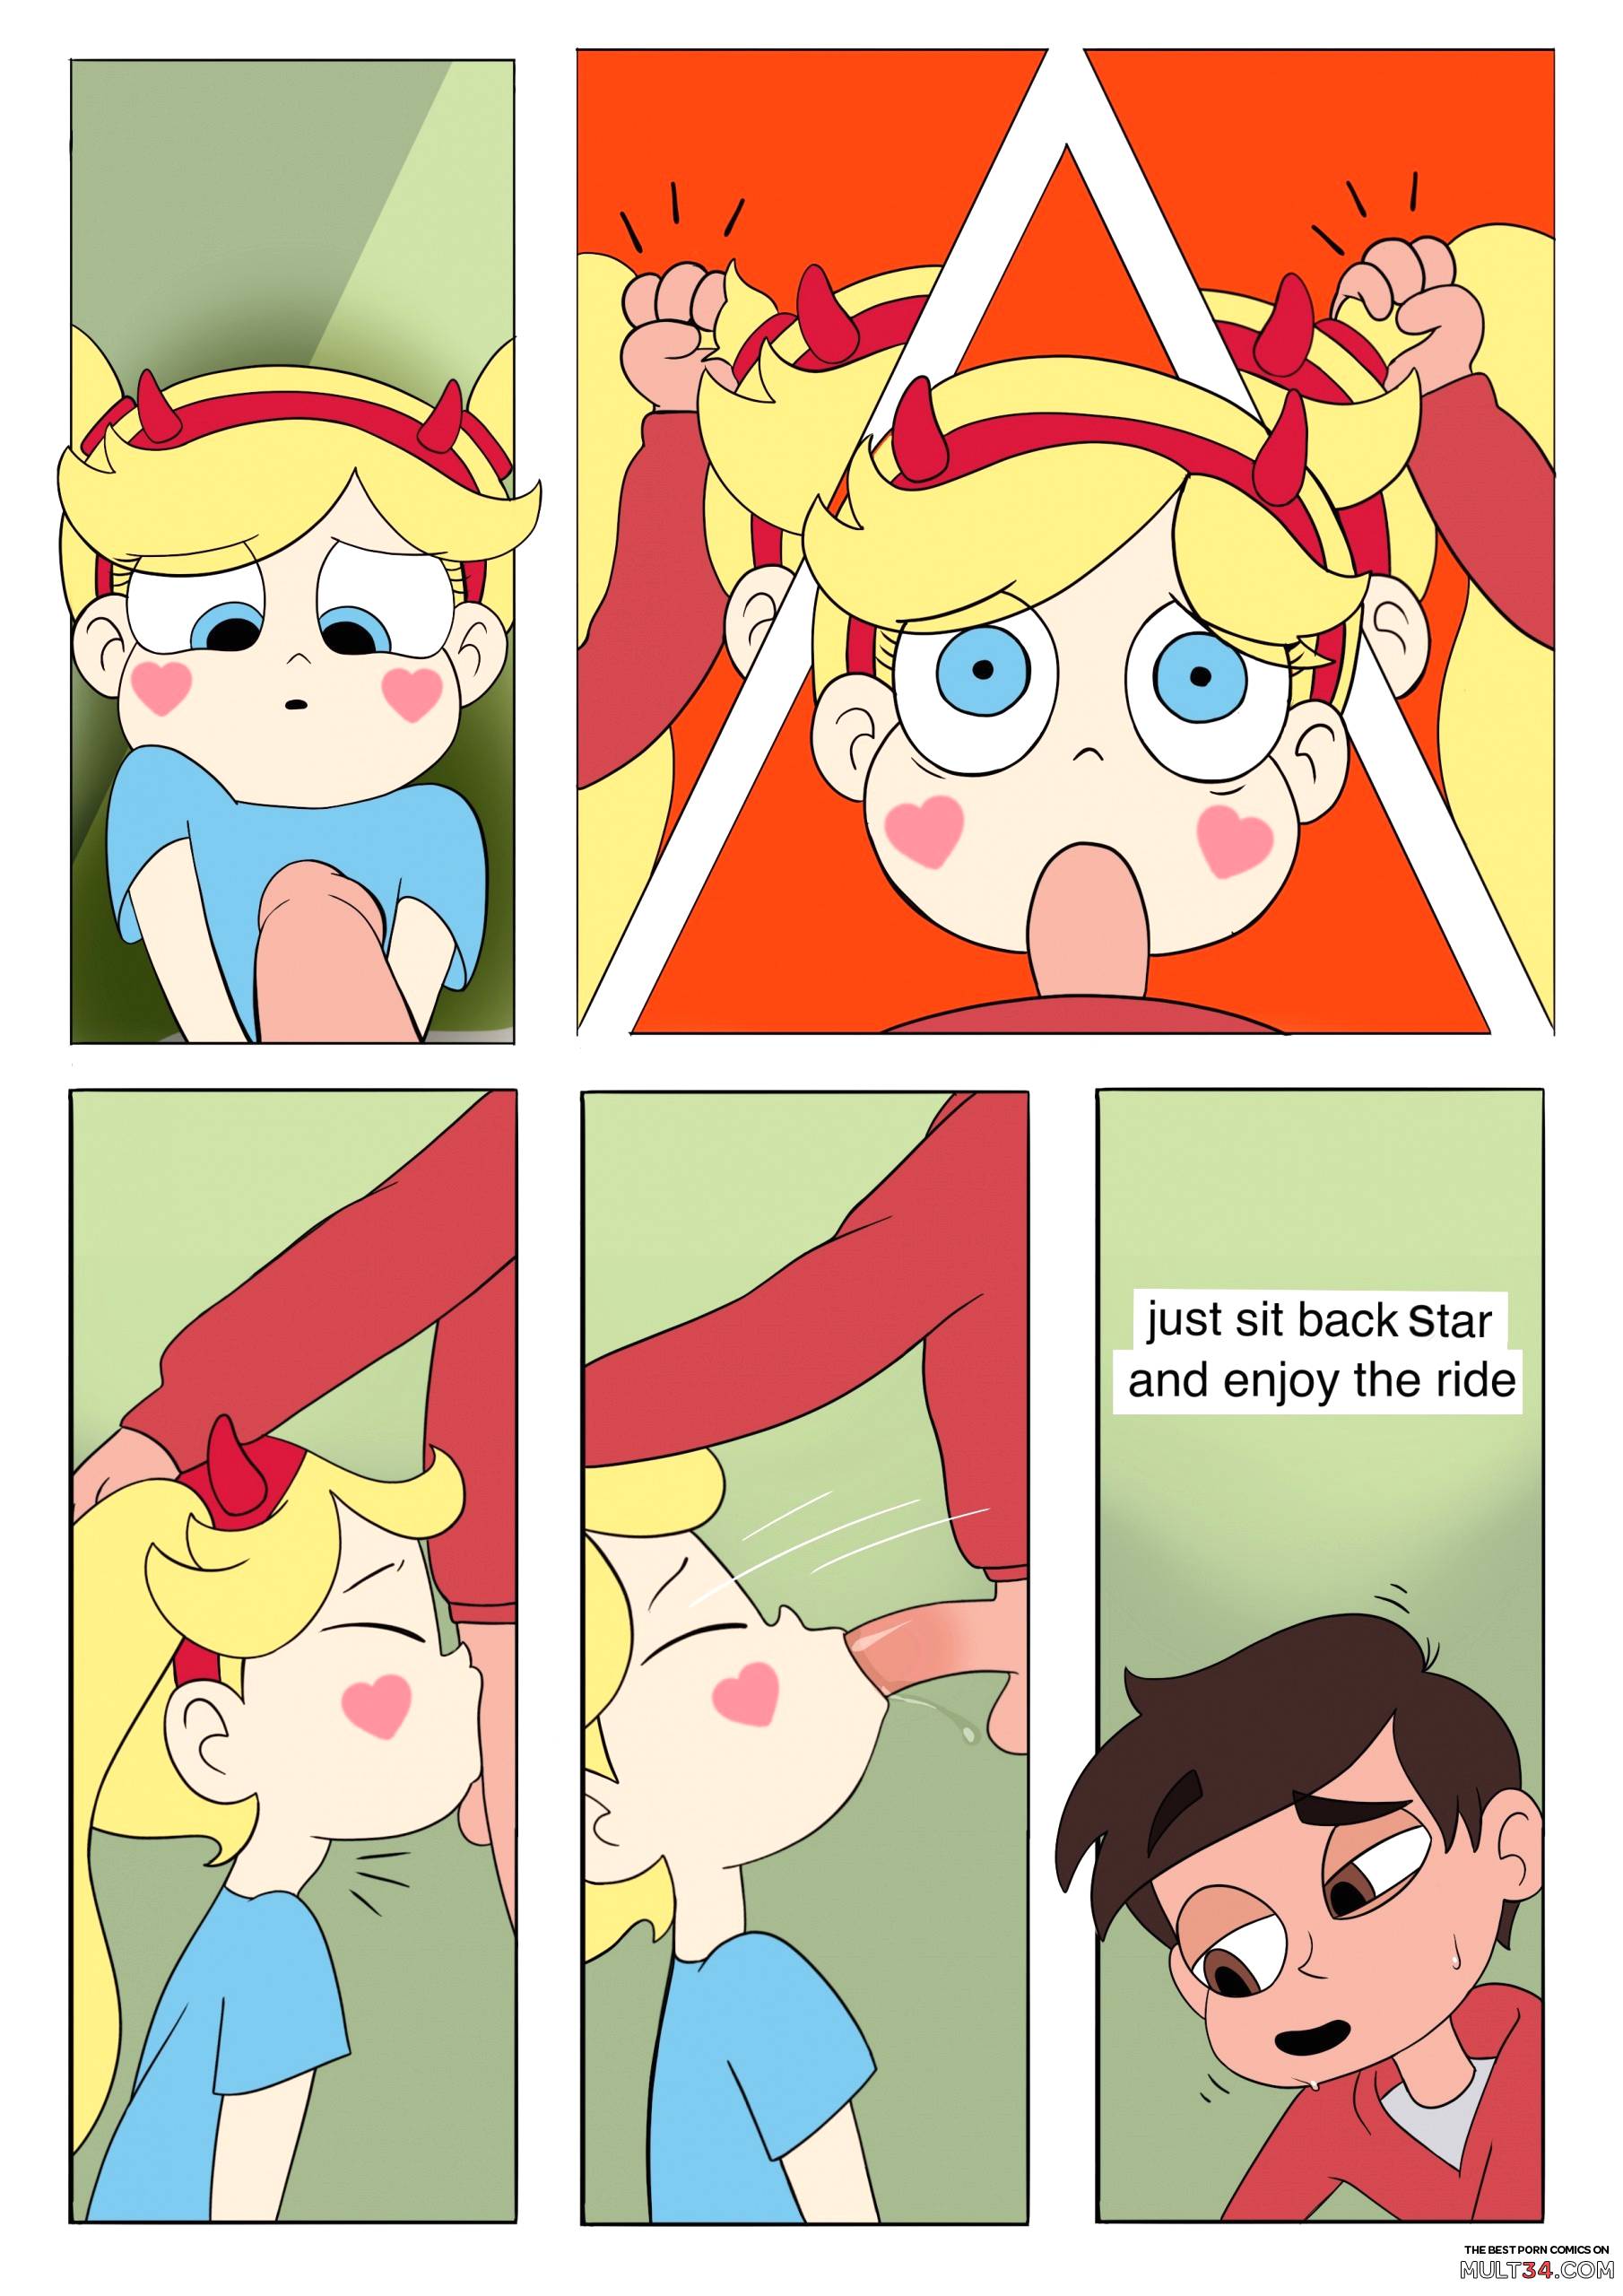 Star Vs the Forces of Evil - Dude-Doodle-Do page 2